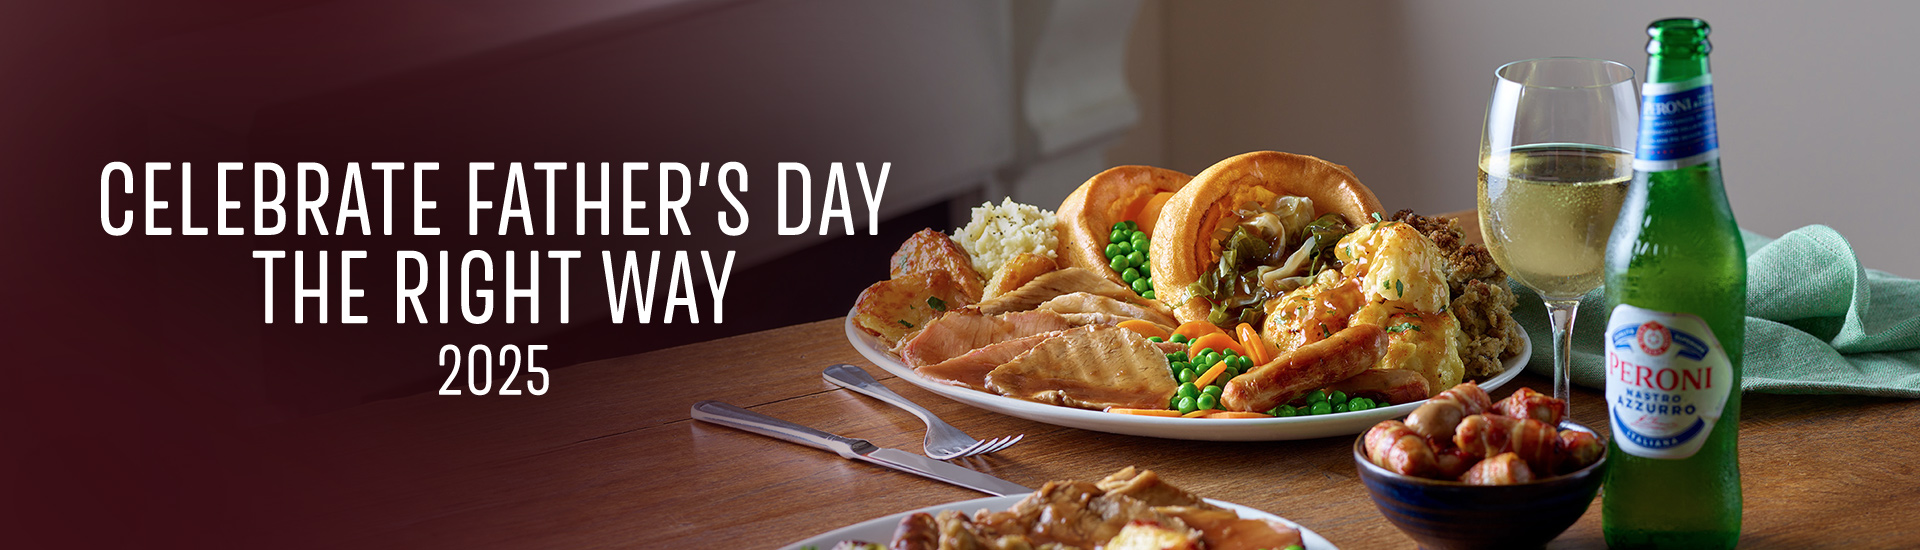 Father’s day carvery in Birmingham